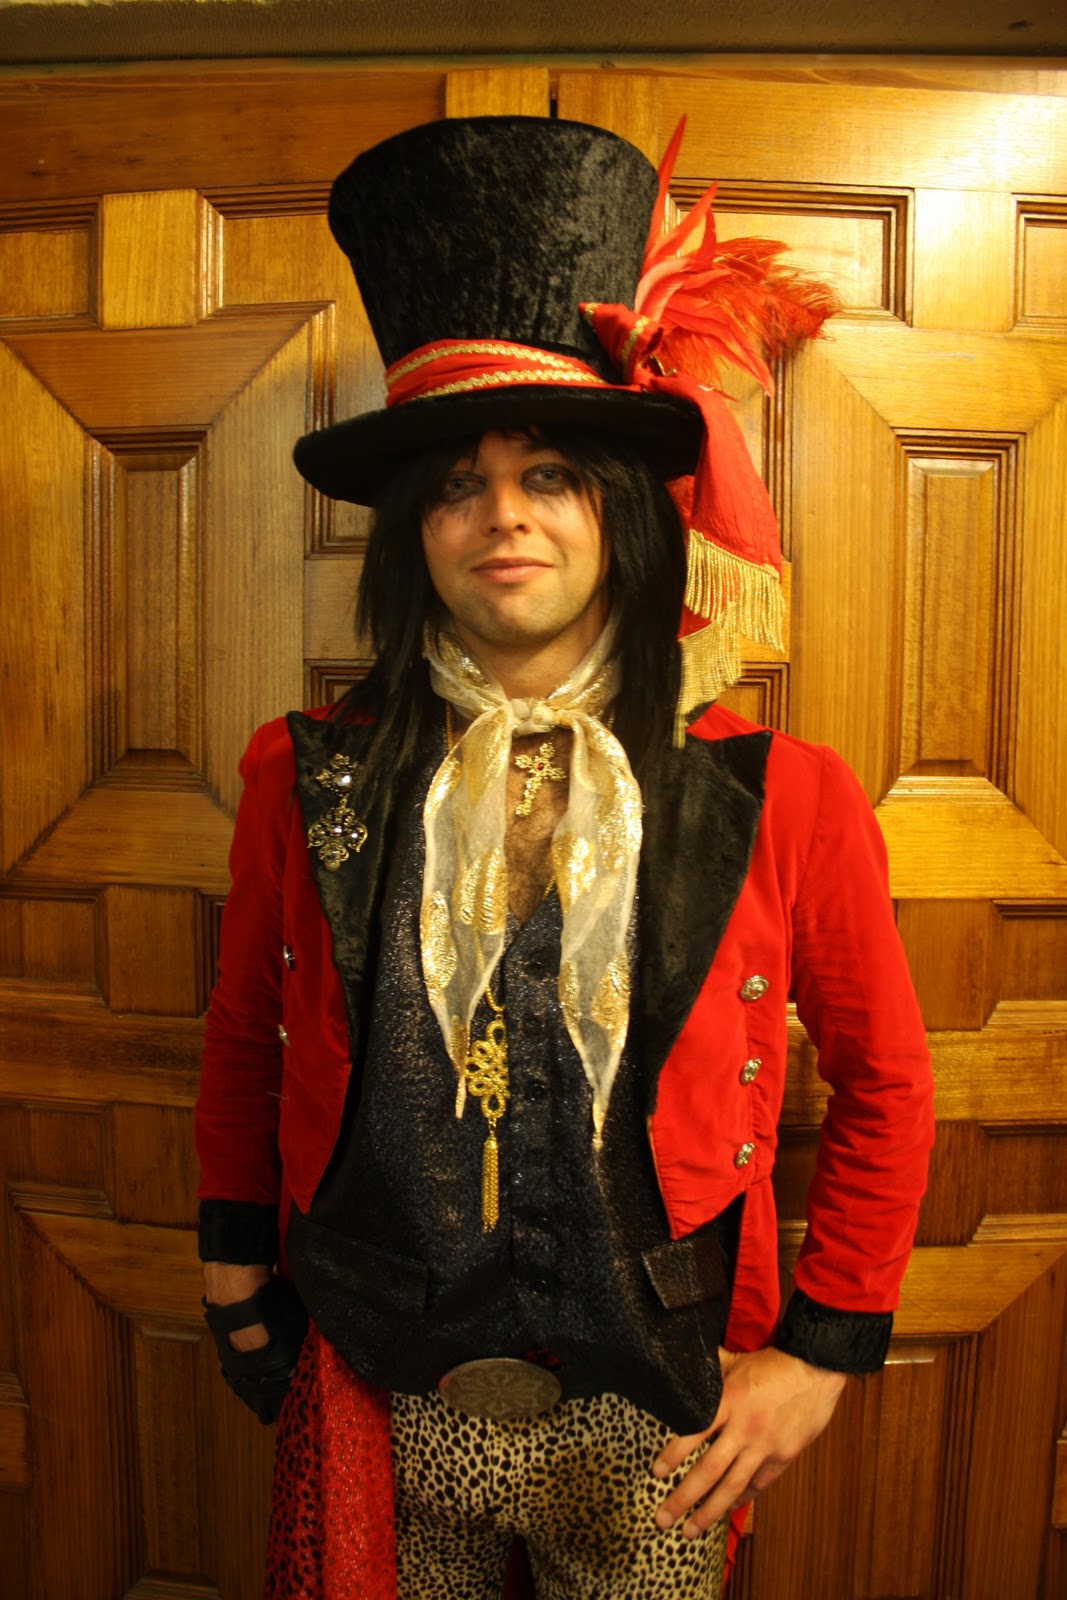 Costume designed by Jess Daly- inspiration: Nikki Sixx (from Motley Crew) a...